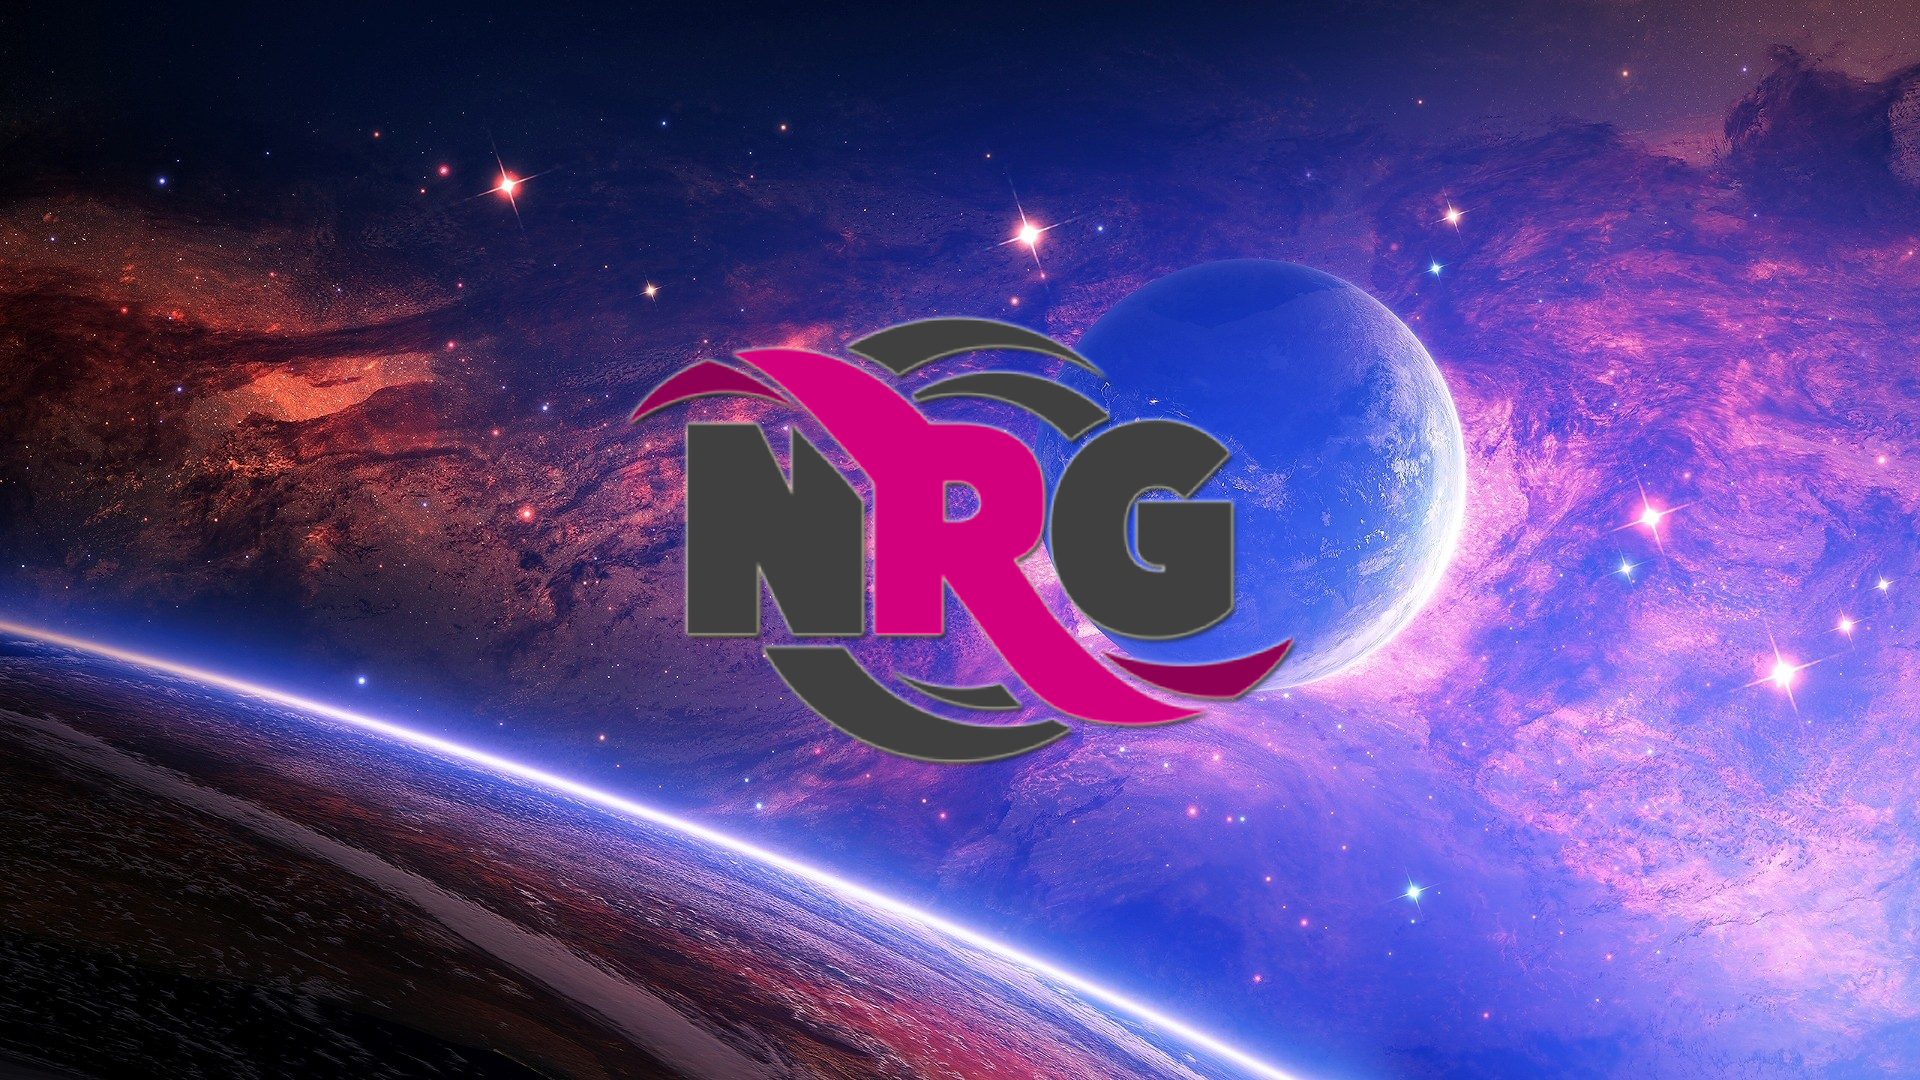 NRG In Space Created By Twitter.com Leftz2003